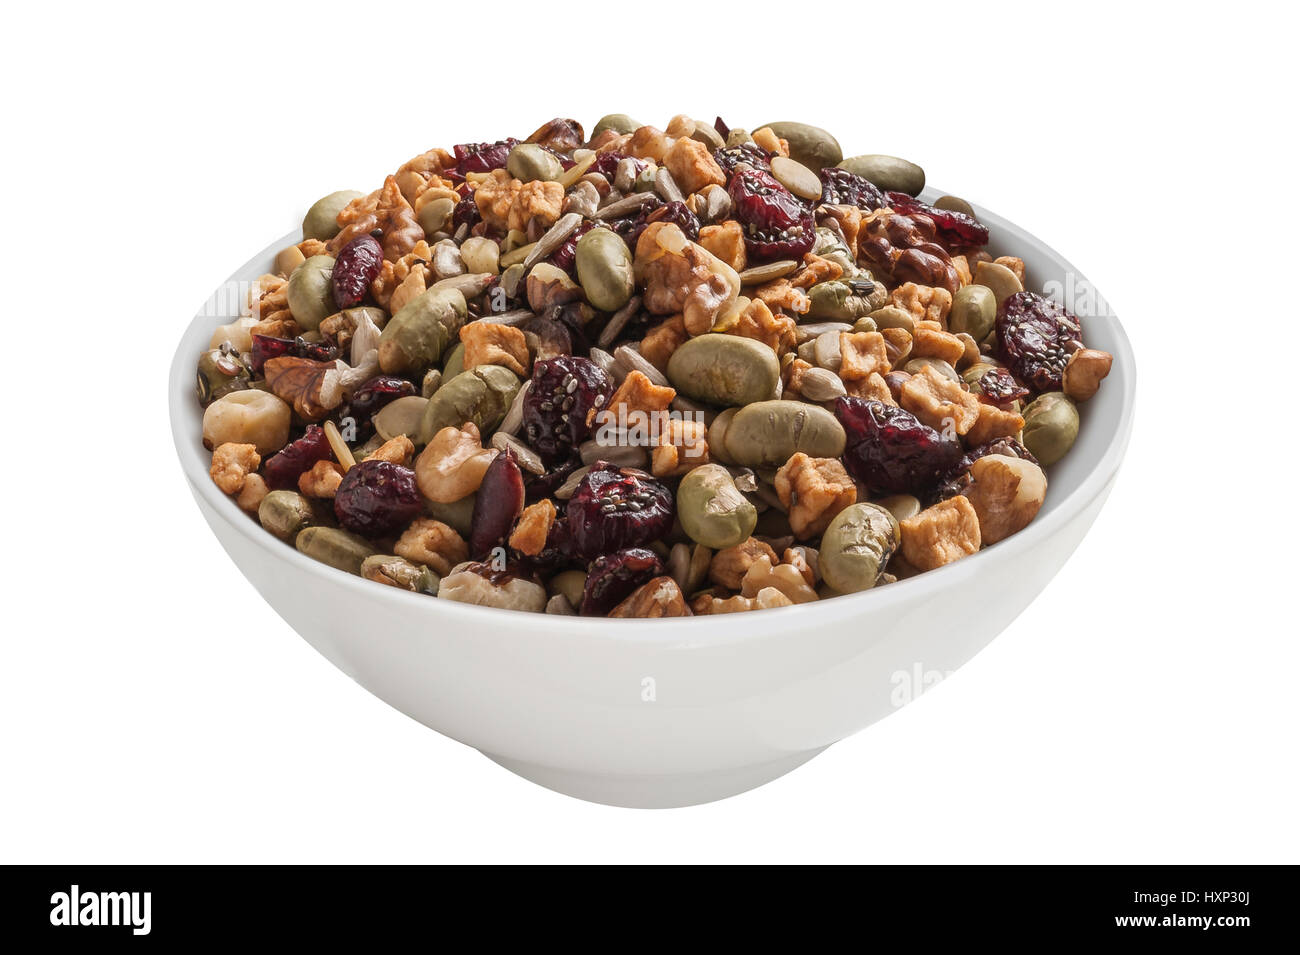 Trail Mix Nuts & Fruit Stock Photo